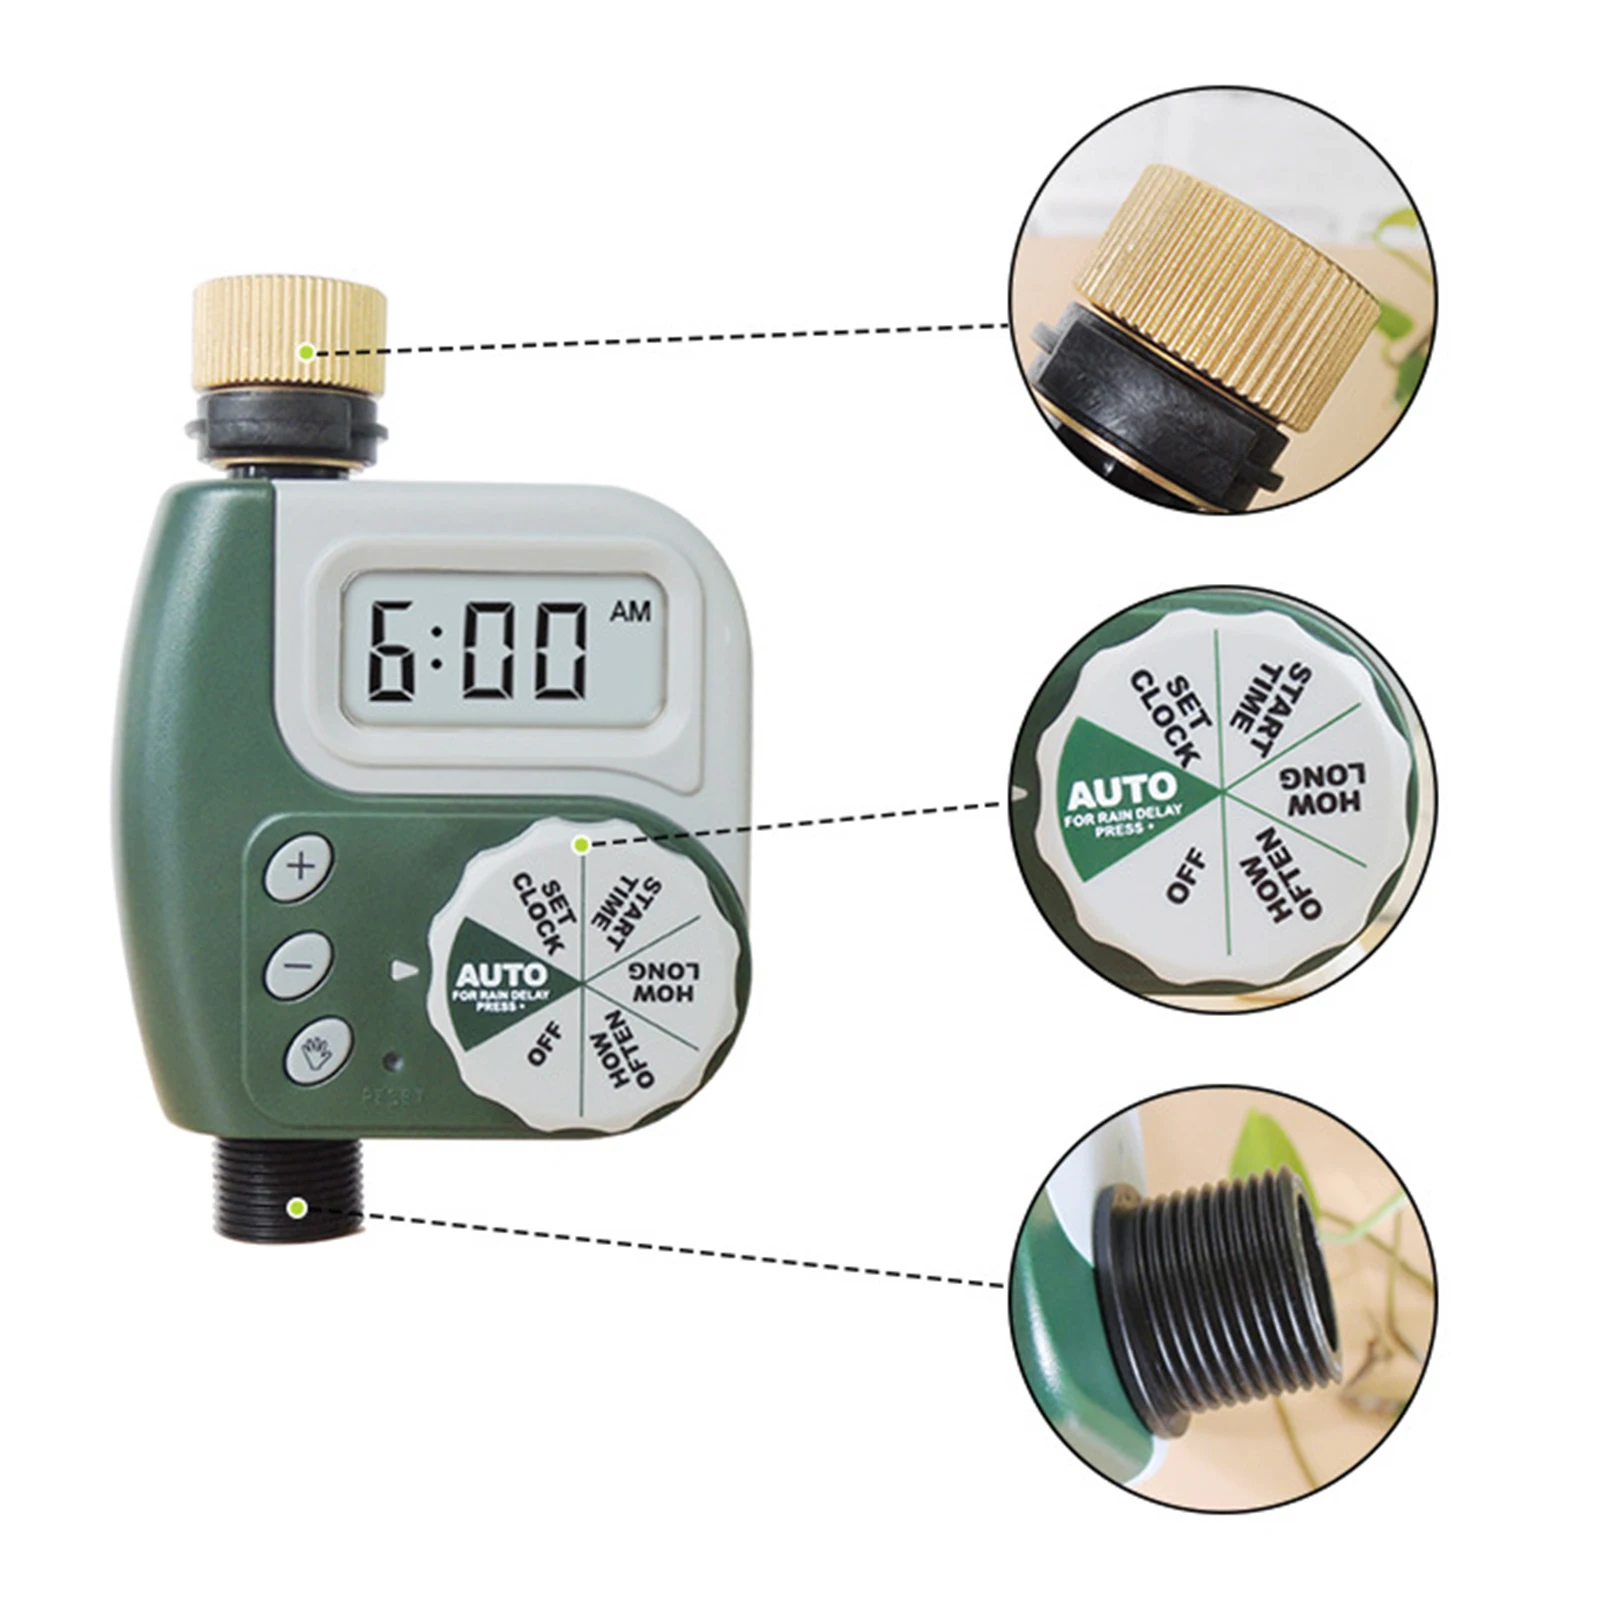 Home Smart Automatic Water Tap Timer Electronic Digital Irrigation Controllers Outdoor Garden Sprinkler Watering Timer Tool